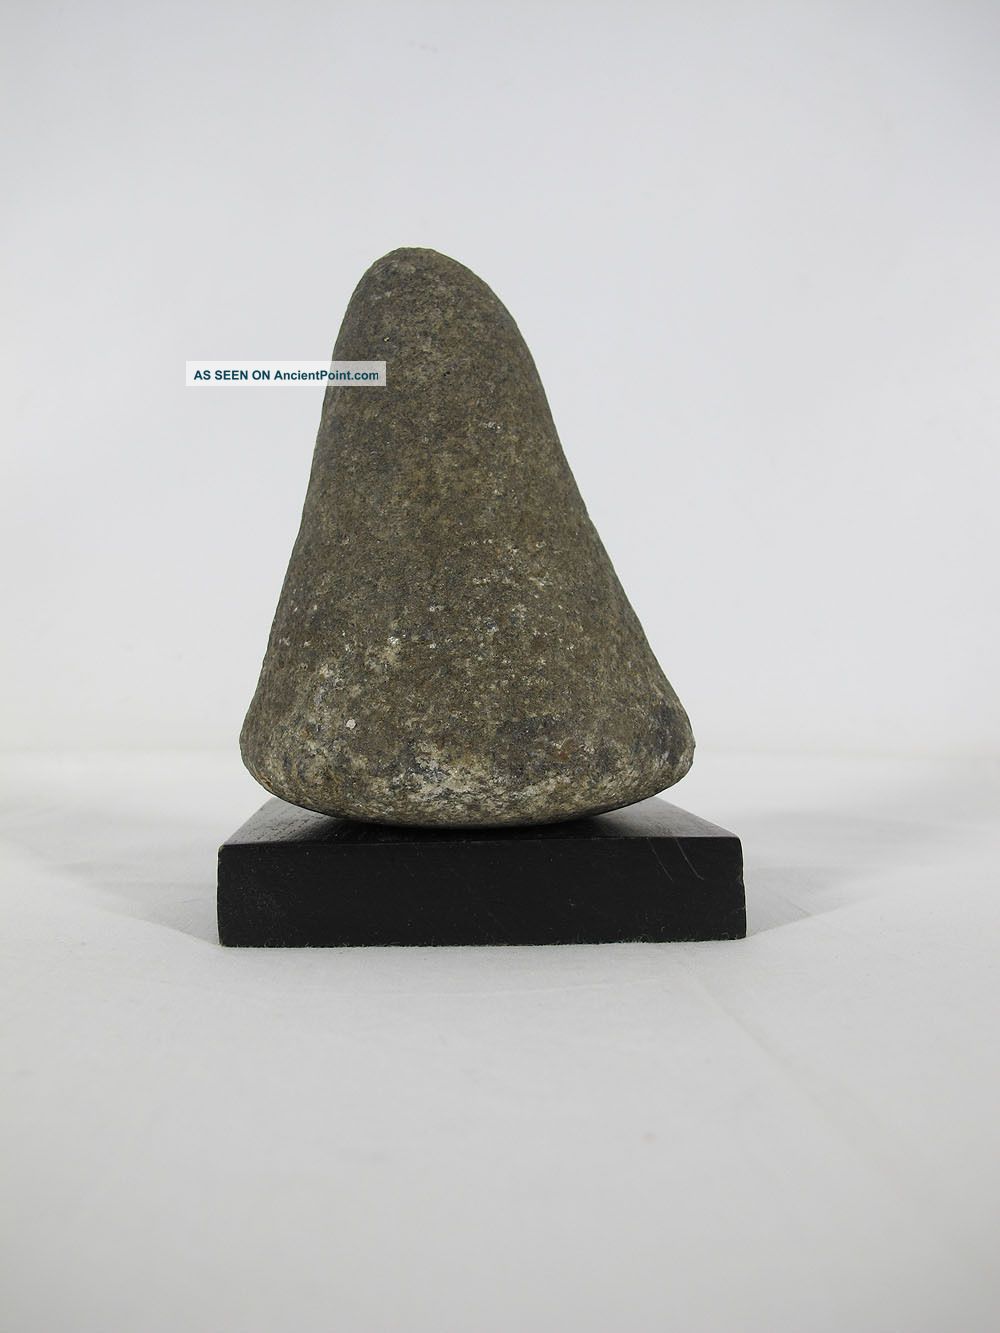 Ancient Native American Artifact Stone Flared Bell Pestle Grinding Stone Nr Yqz The Americas photo